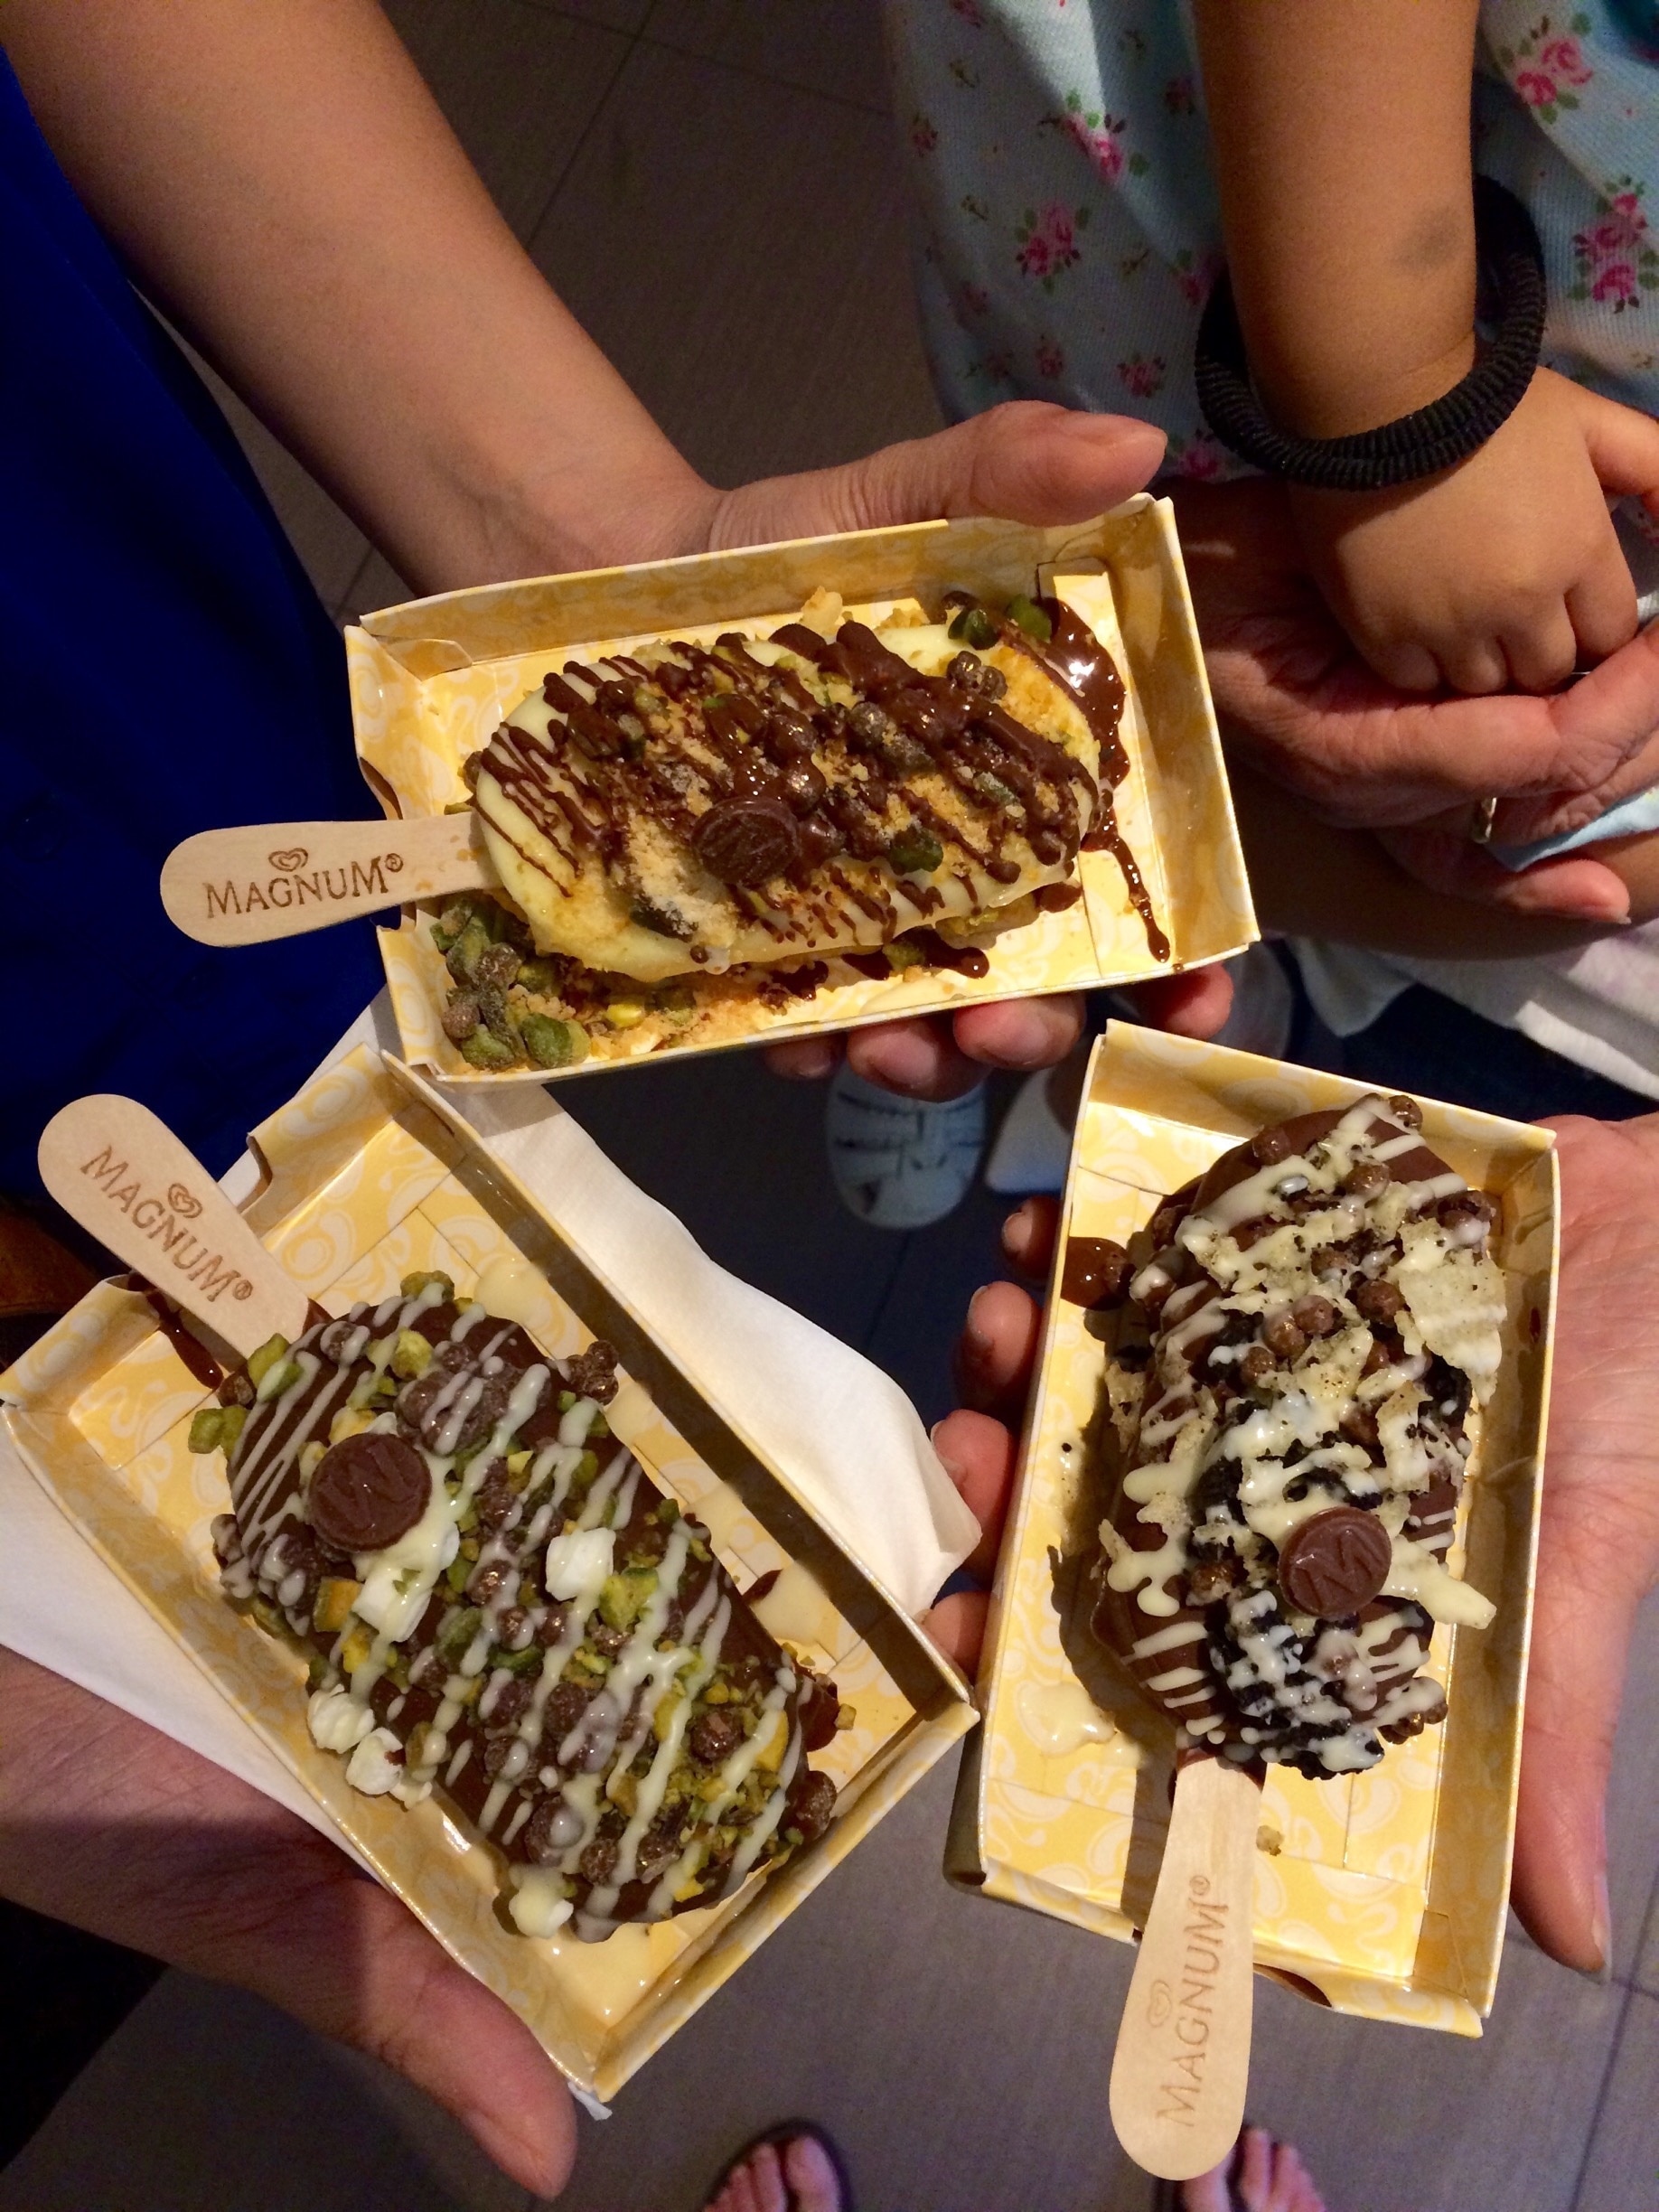 MAGNUM ICE CREAM SHOPPE - Make your own magnum bar! Everything from potato chips, honeycomb, pistachios, cookie crumbles, and even cheese?!